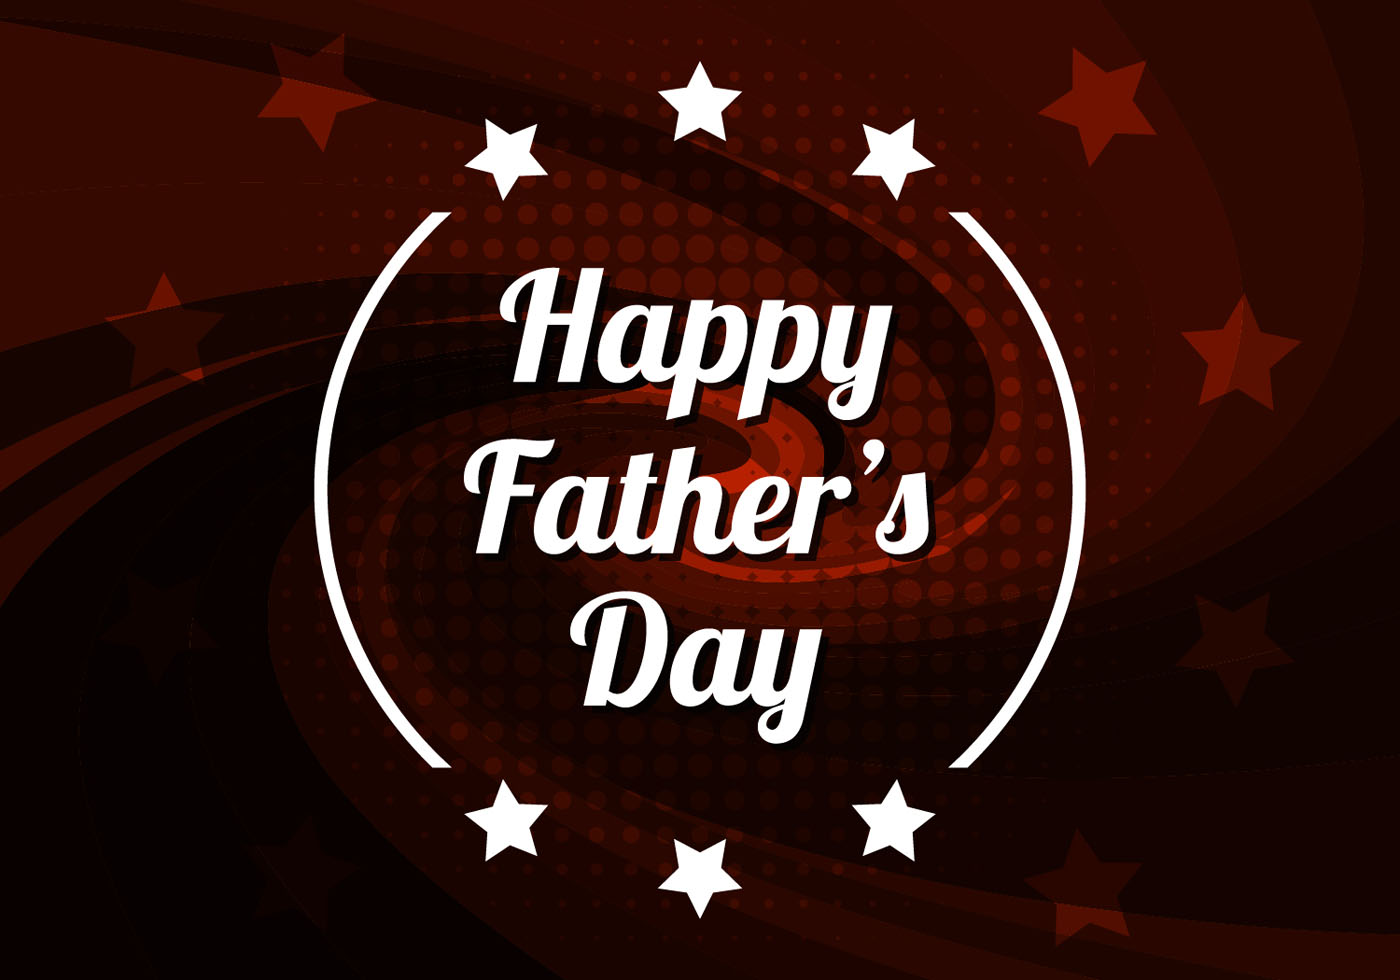 Download Free Vector Happy Father's Day Background - Download Free ...